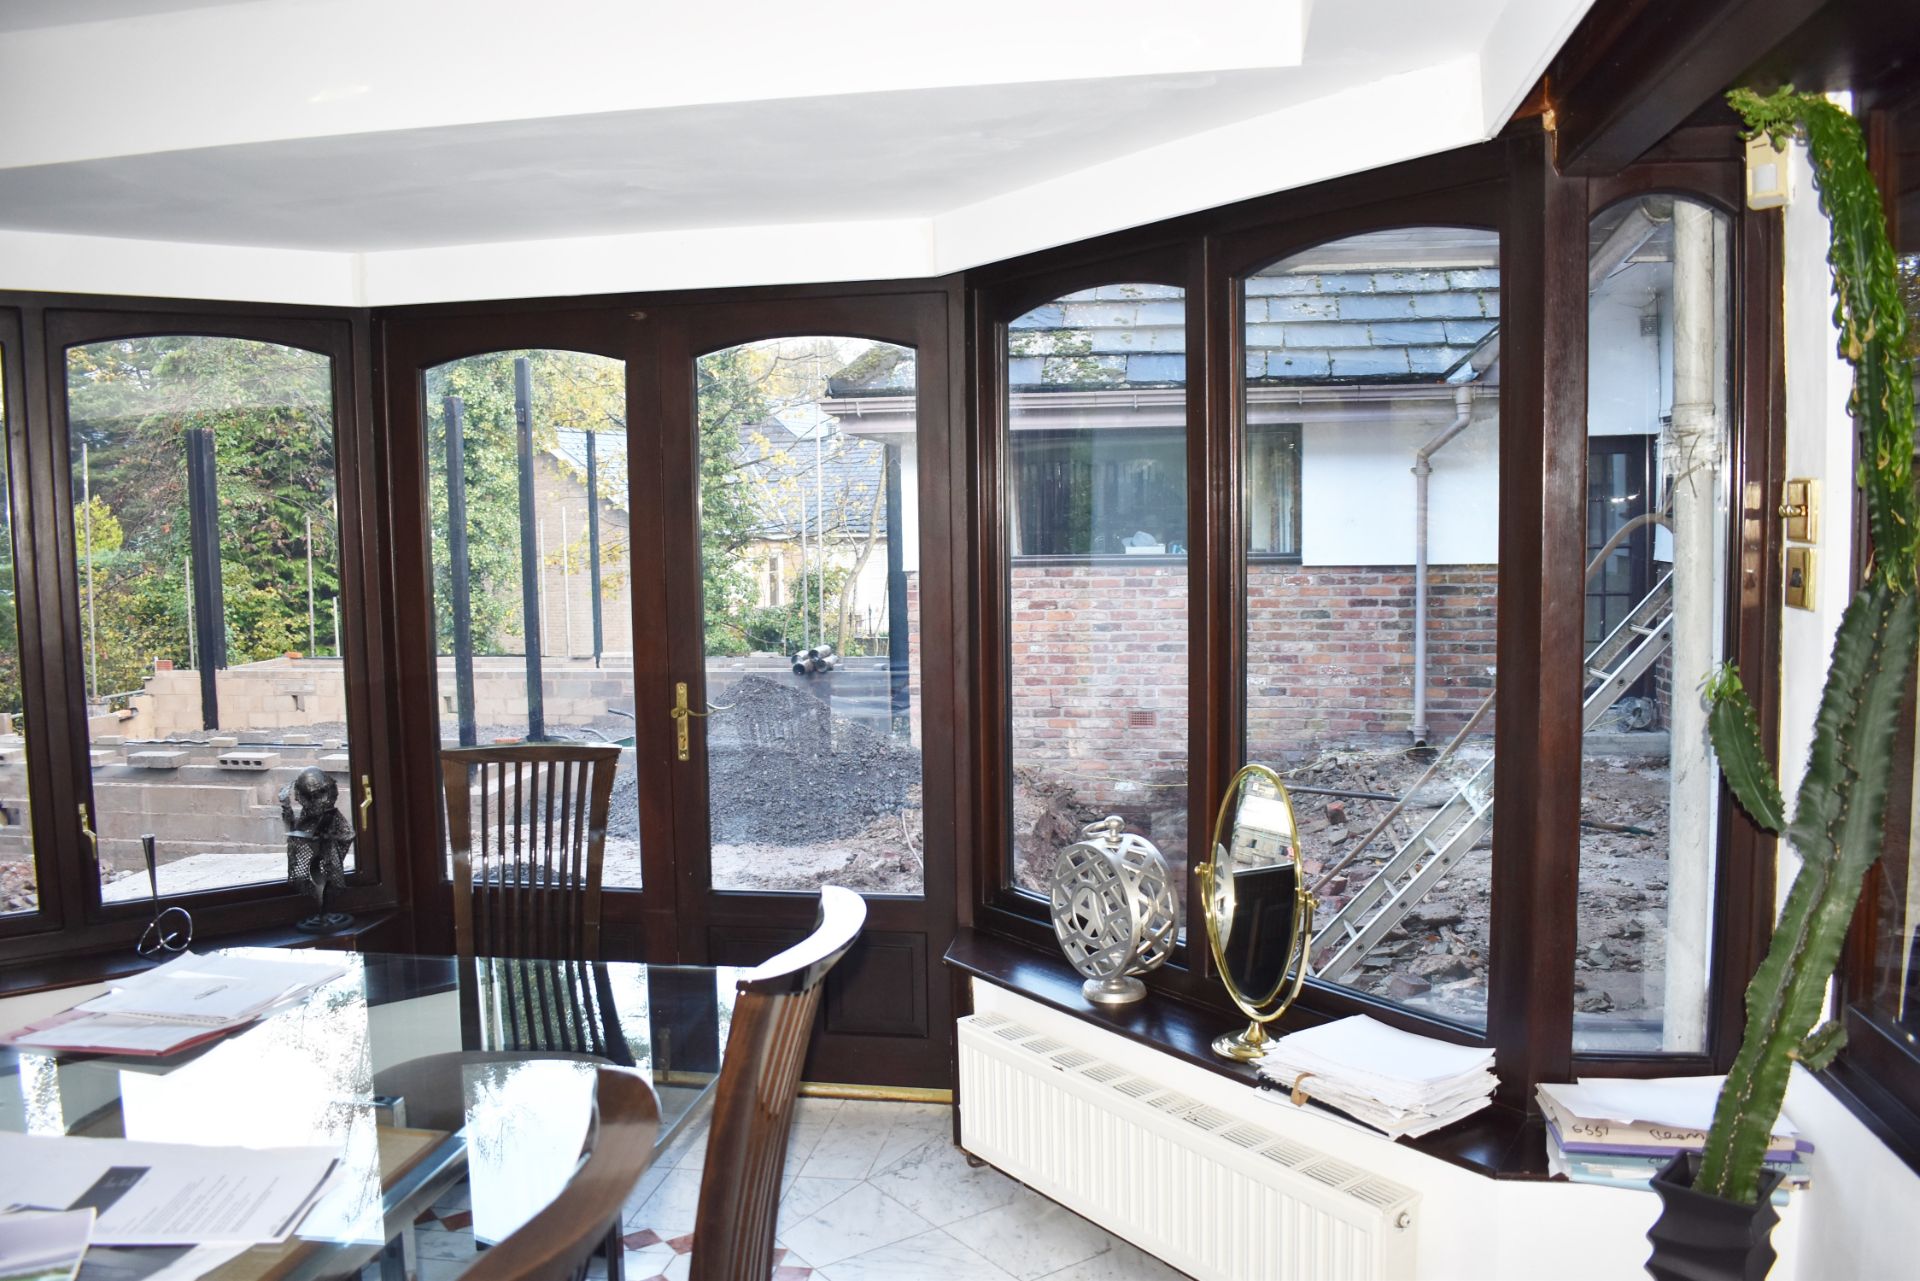 Selection of Hardwood Double Glazed Conservatory Windows and French Doors - Fitted With Darbytuf - Image 8 of 9